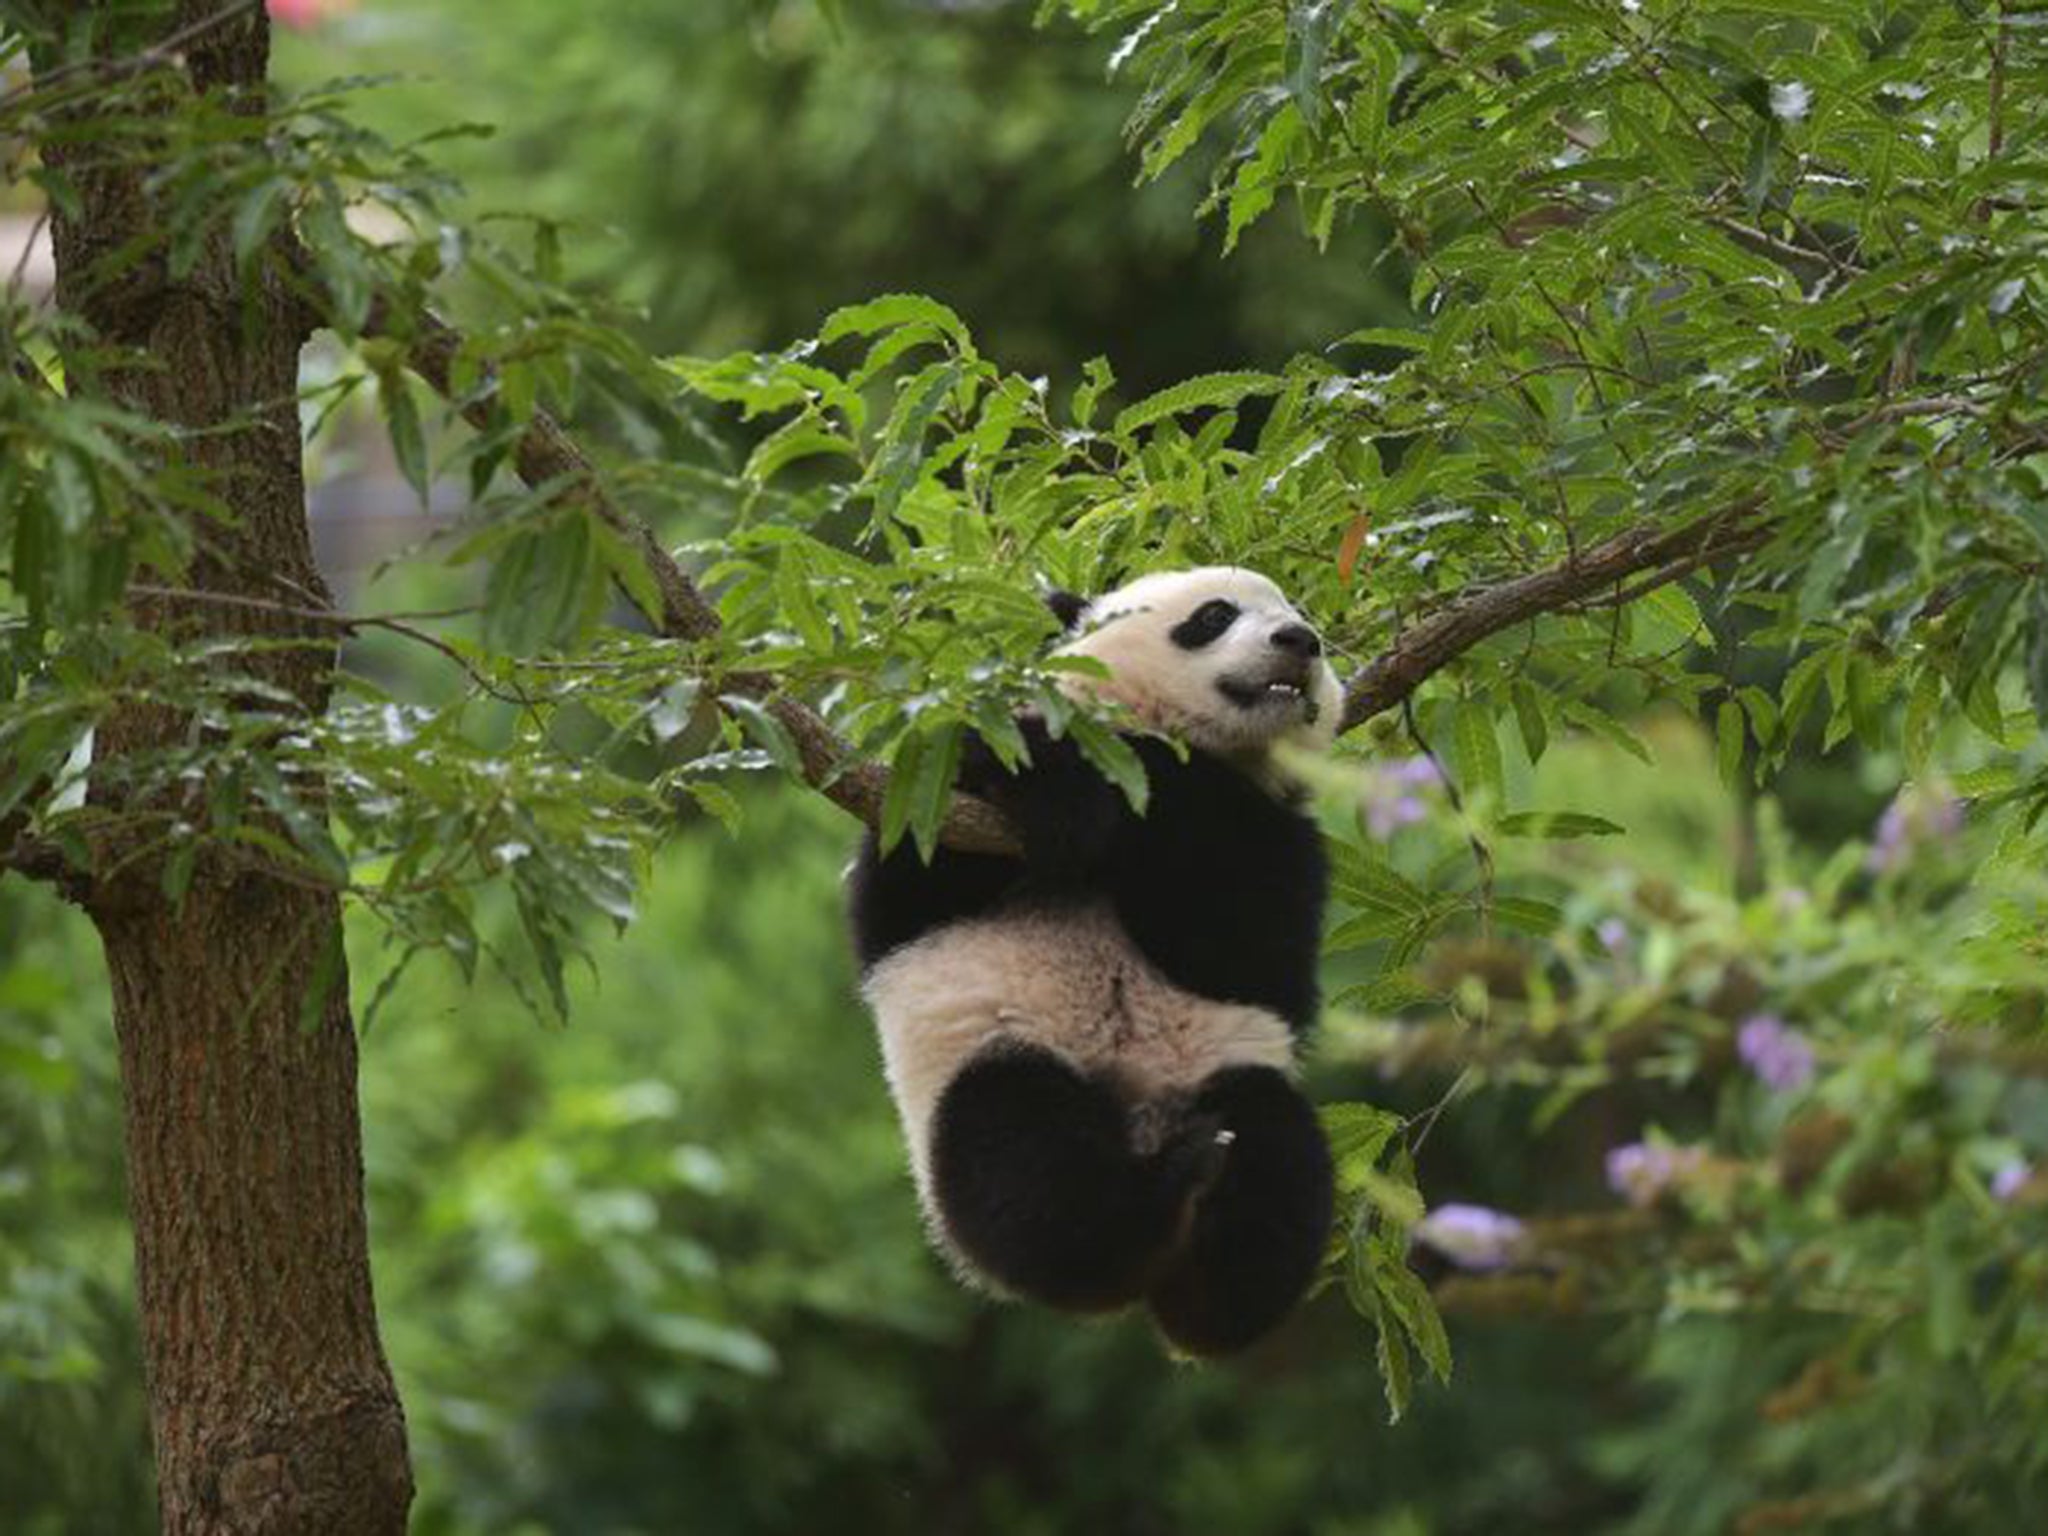 According to a new census in China, the population of pandas has gone up by 268 since 2003